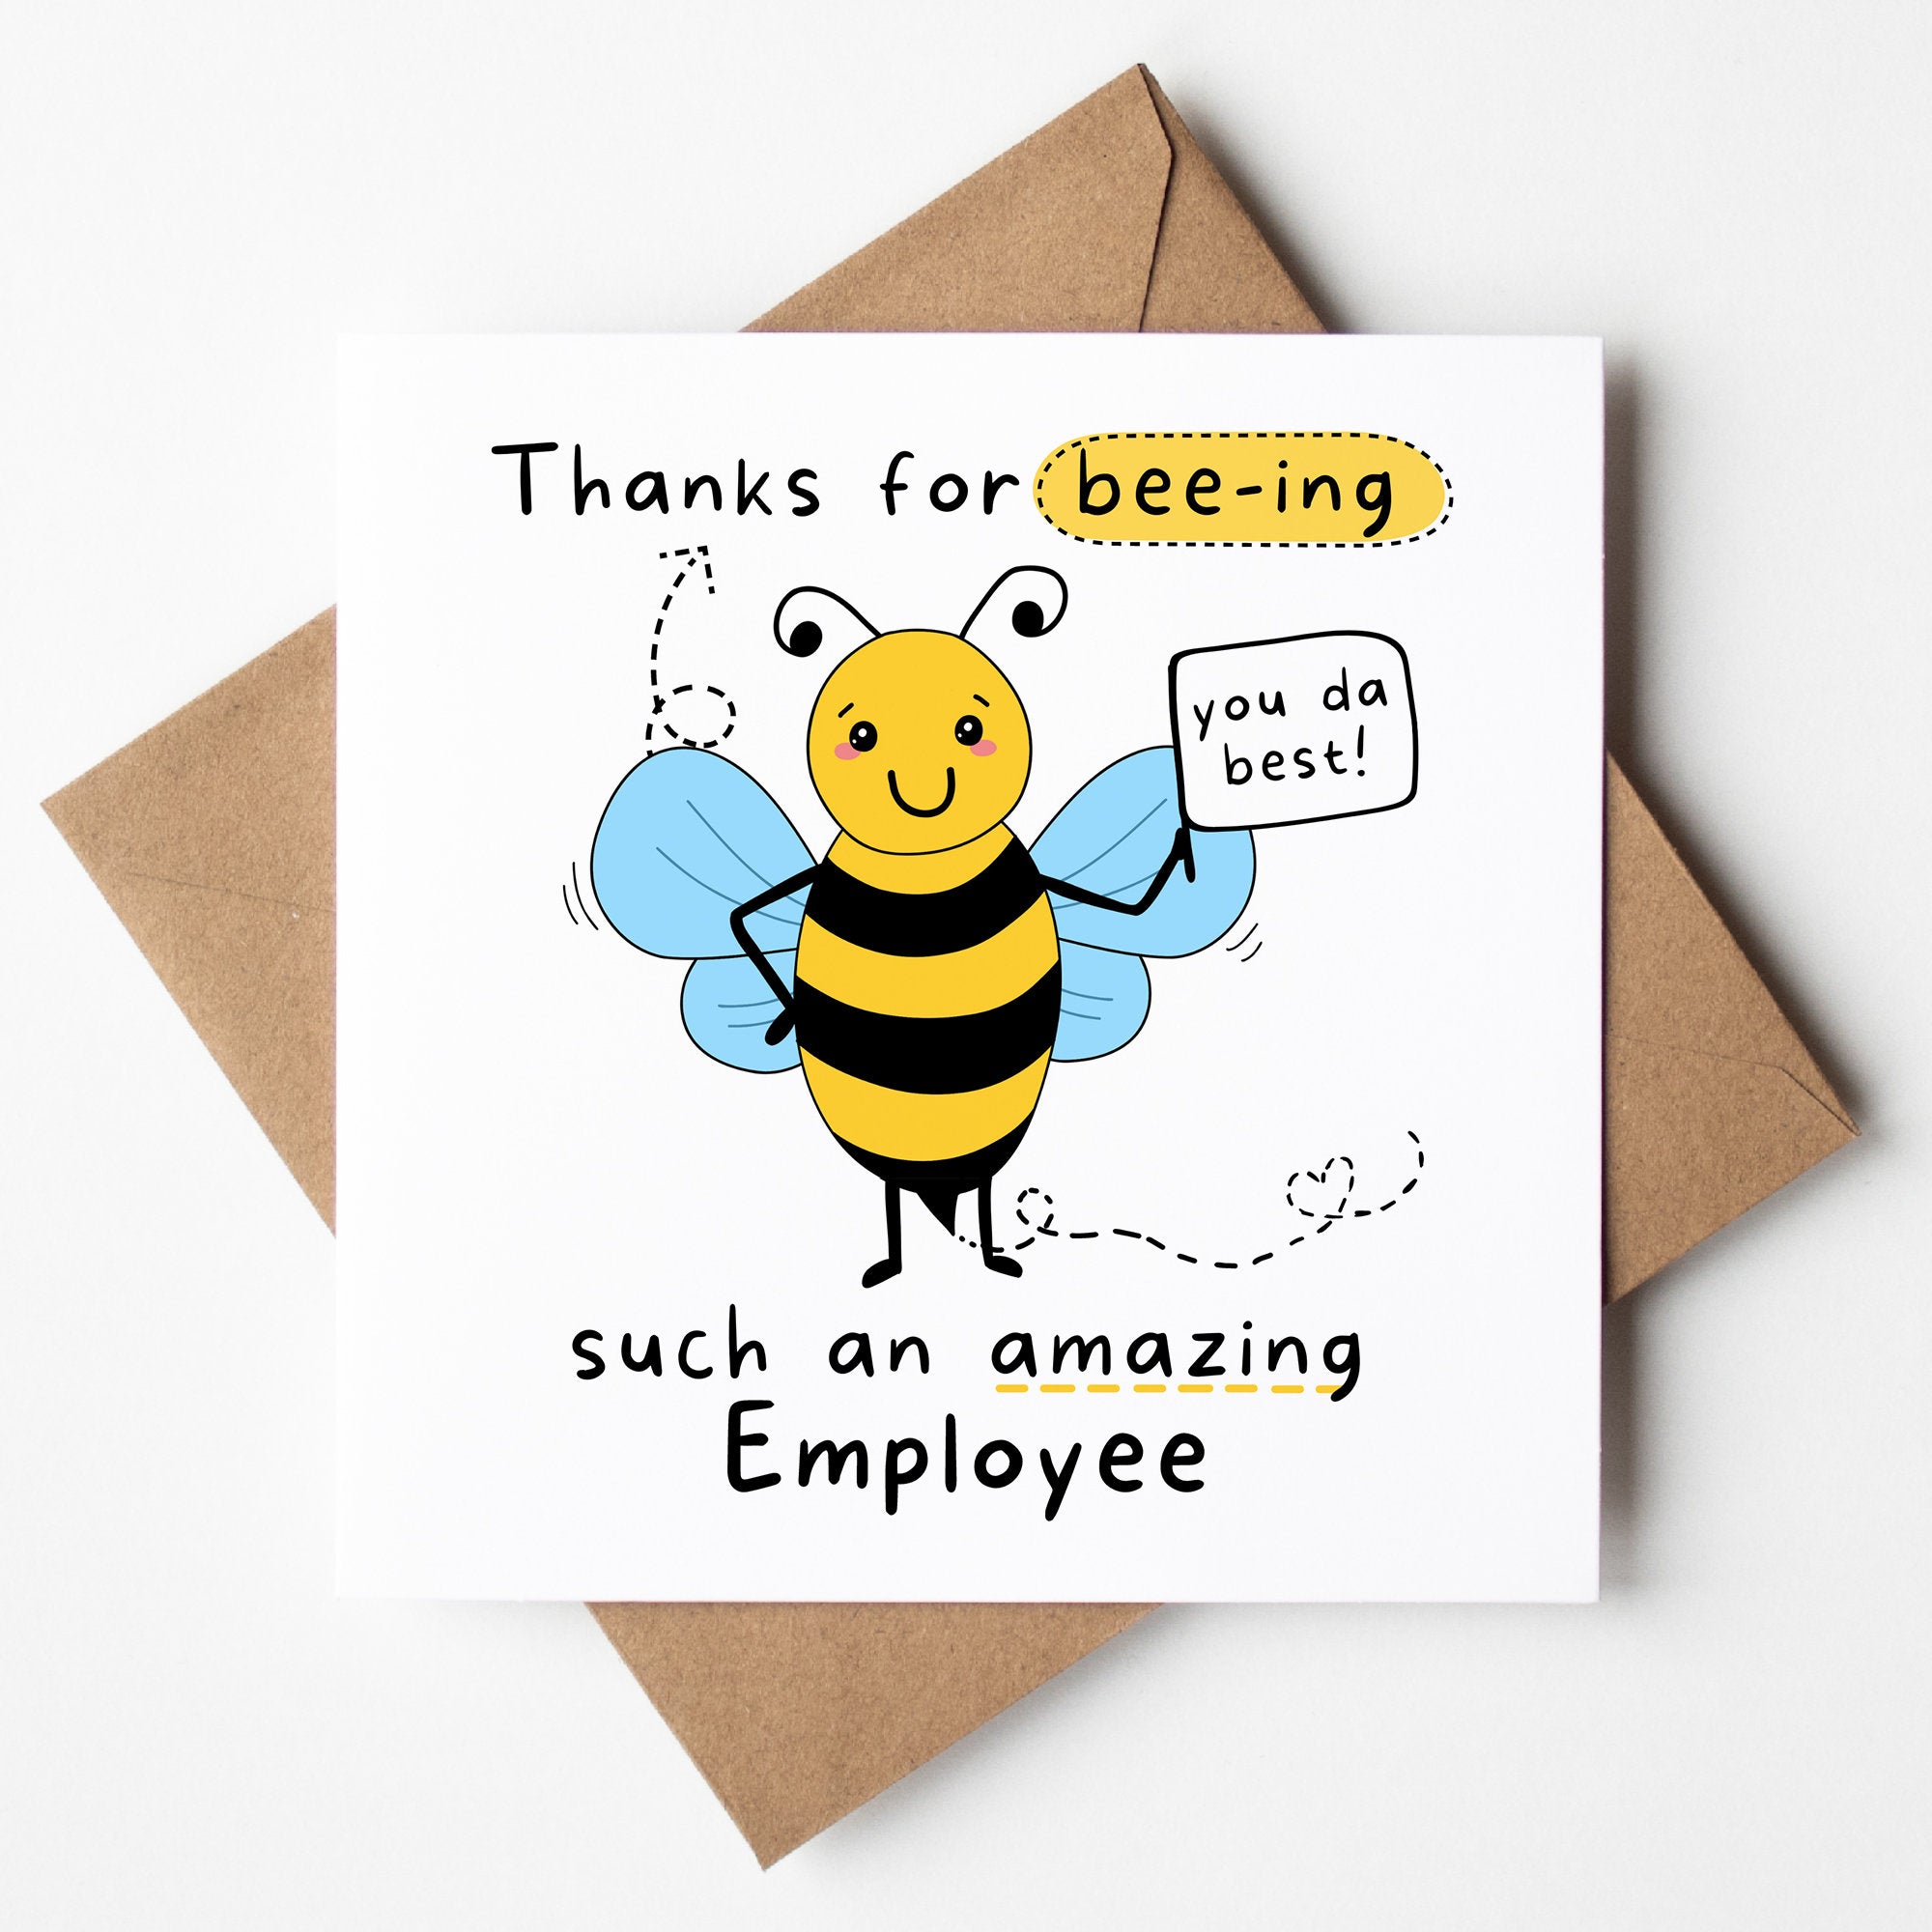 Thanks For Beeing Such An Amazing Employee, Cute Card, Bee Pun, Employee Thank You Card, From Boss, Employee leaving